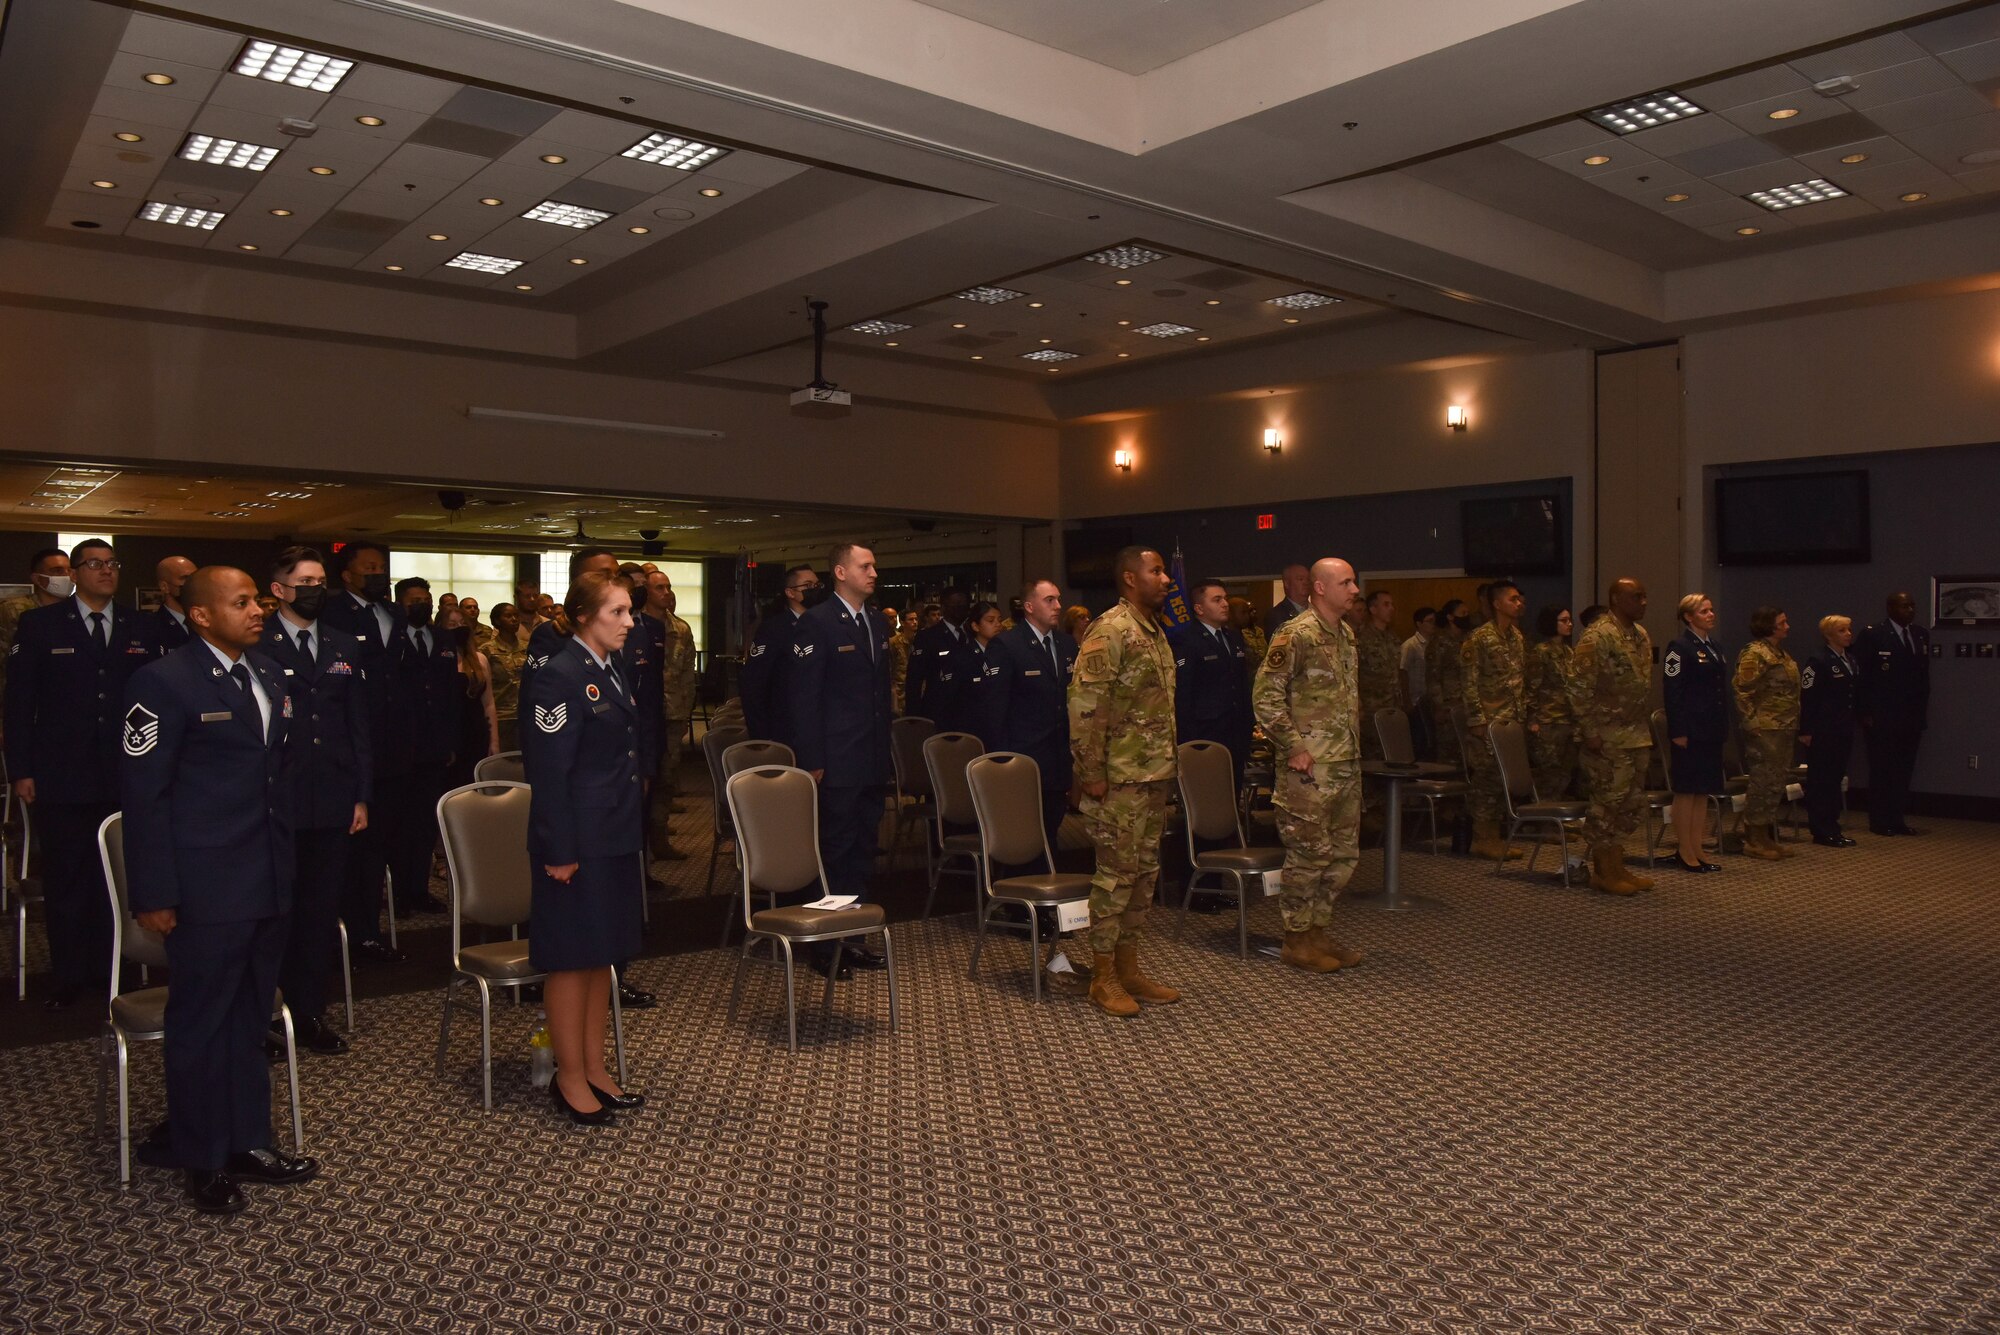 Goodfellow members celebrate the graduates from Airman Leadership School, Class 21-E, on Goodfellow Air Force Base, Texas, July 8, 2021. Class 21-E graduated 15 Airmen into front-line supervisors. (U.S. Air Force photo by Senior Airman Jermaine Ayers)